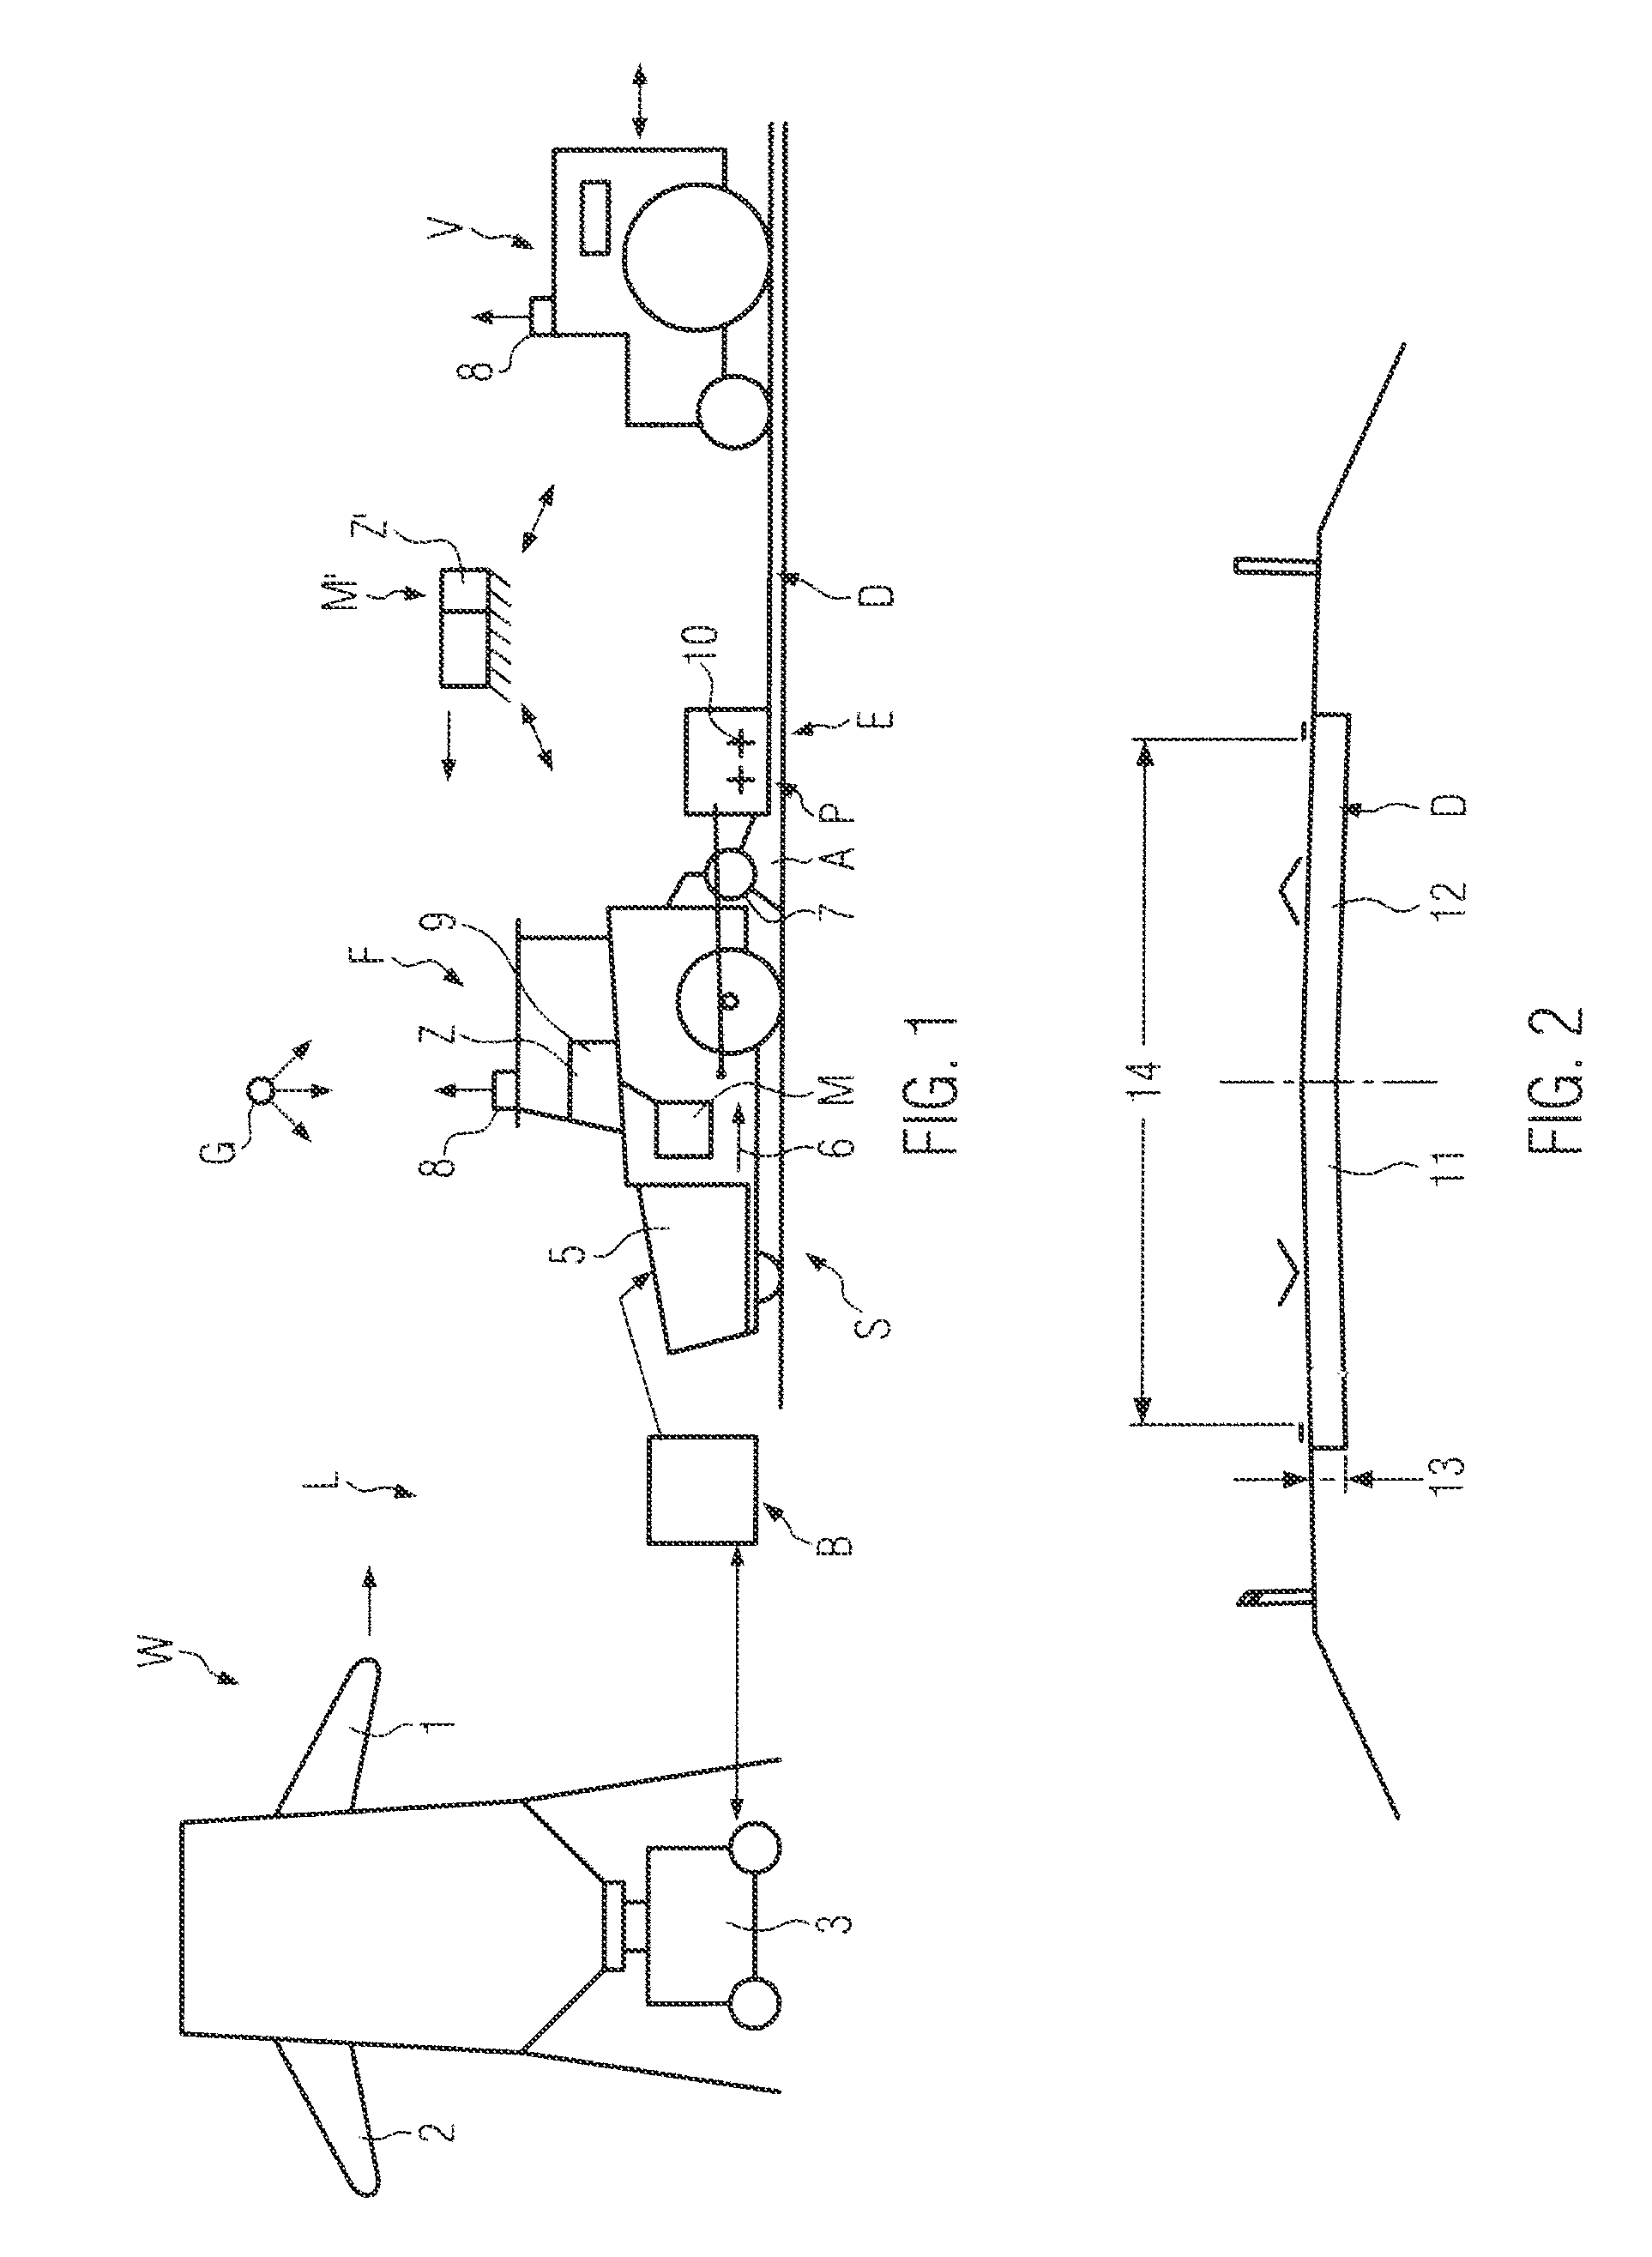 System and method for laying down and compacting an asphalt layer